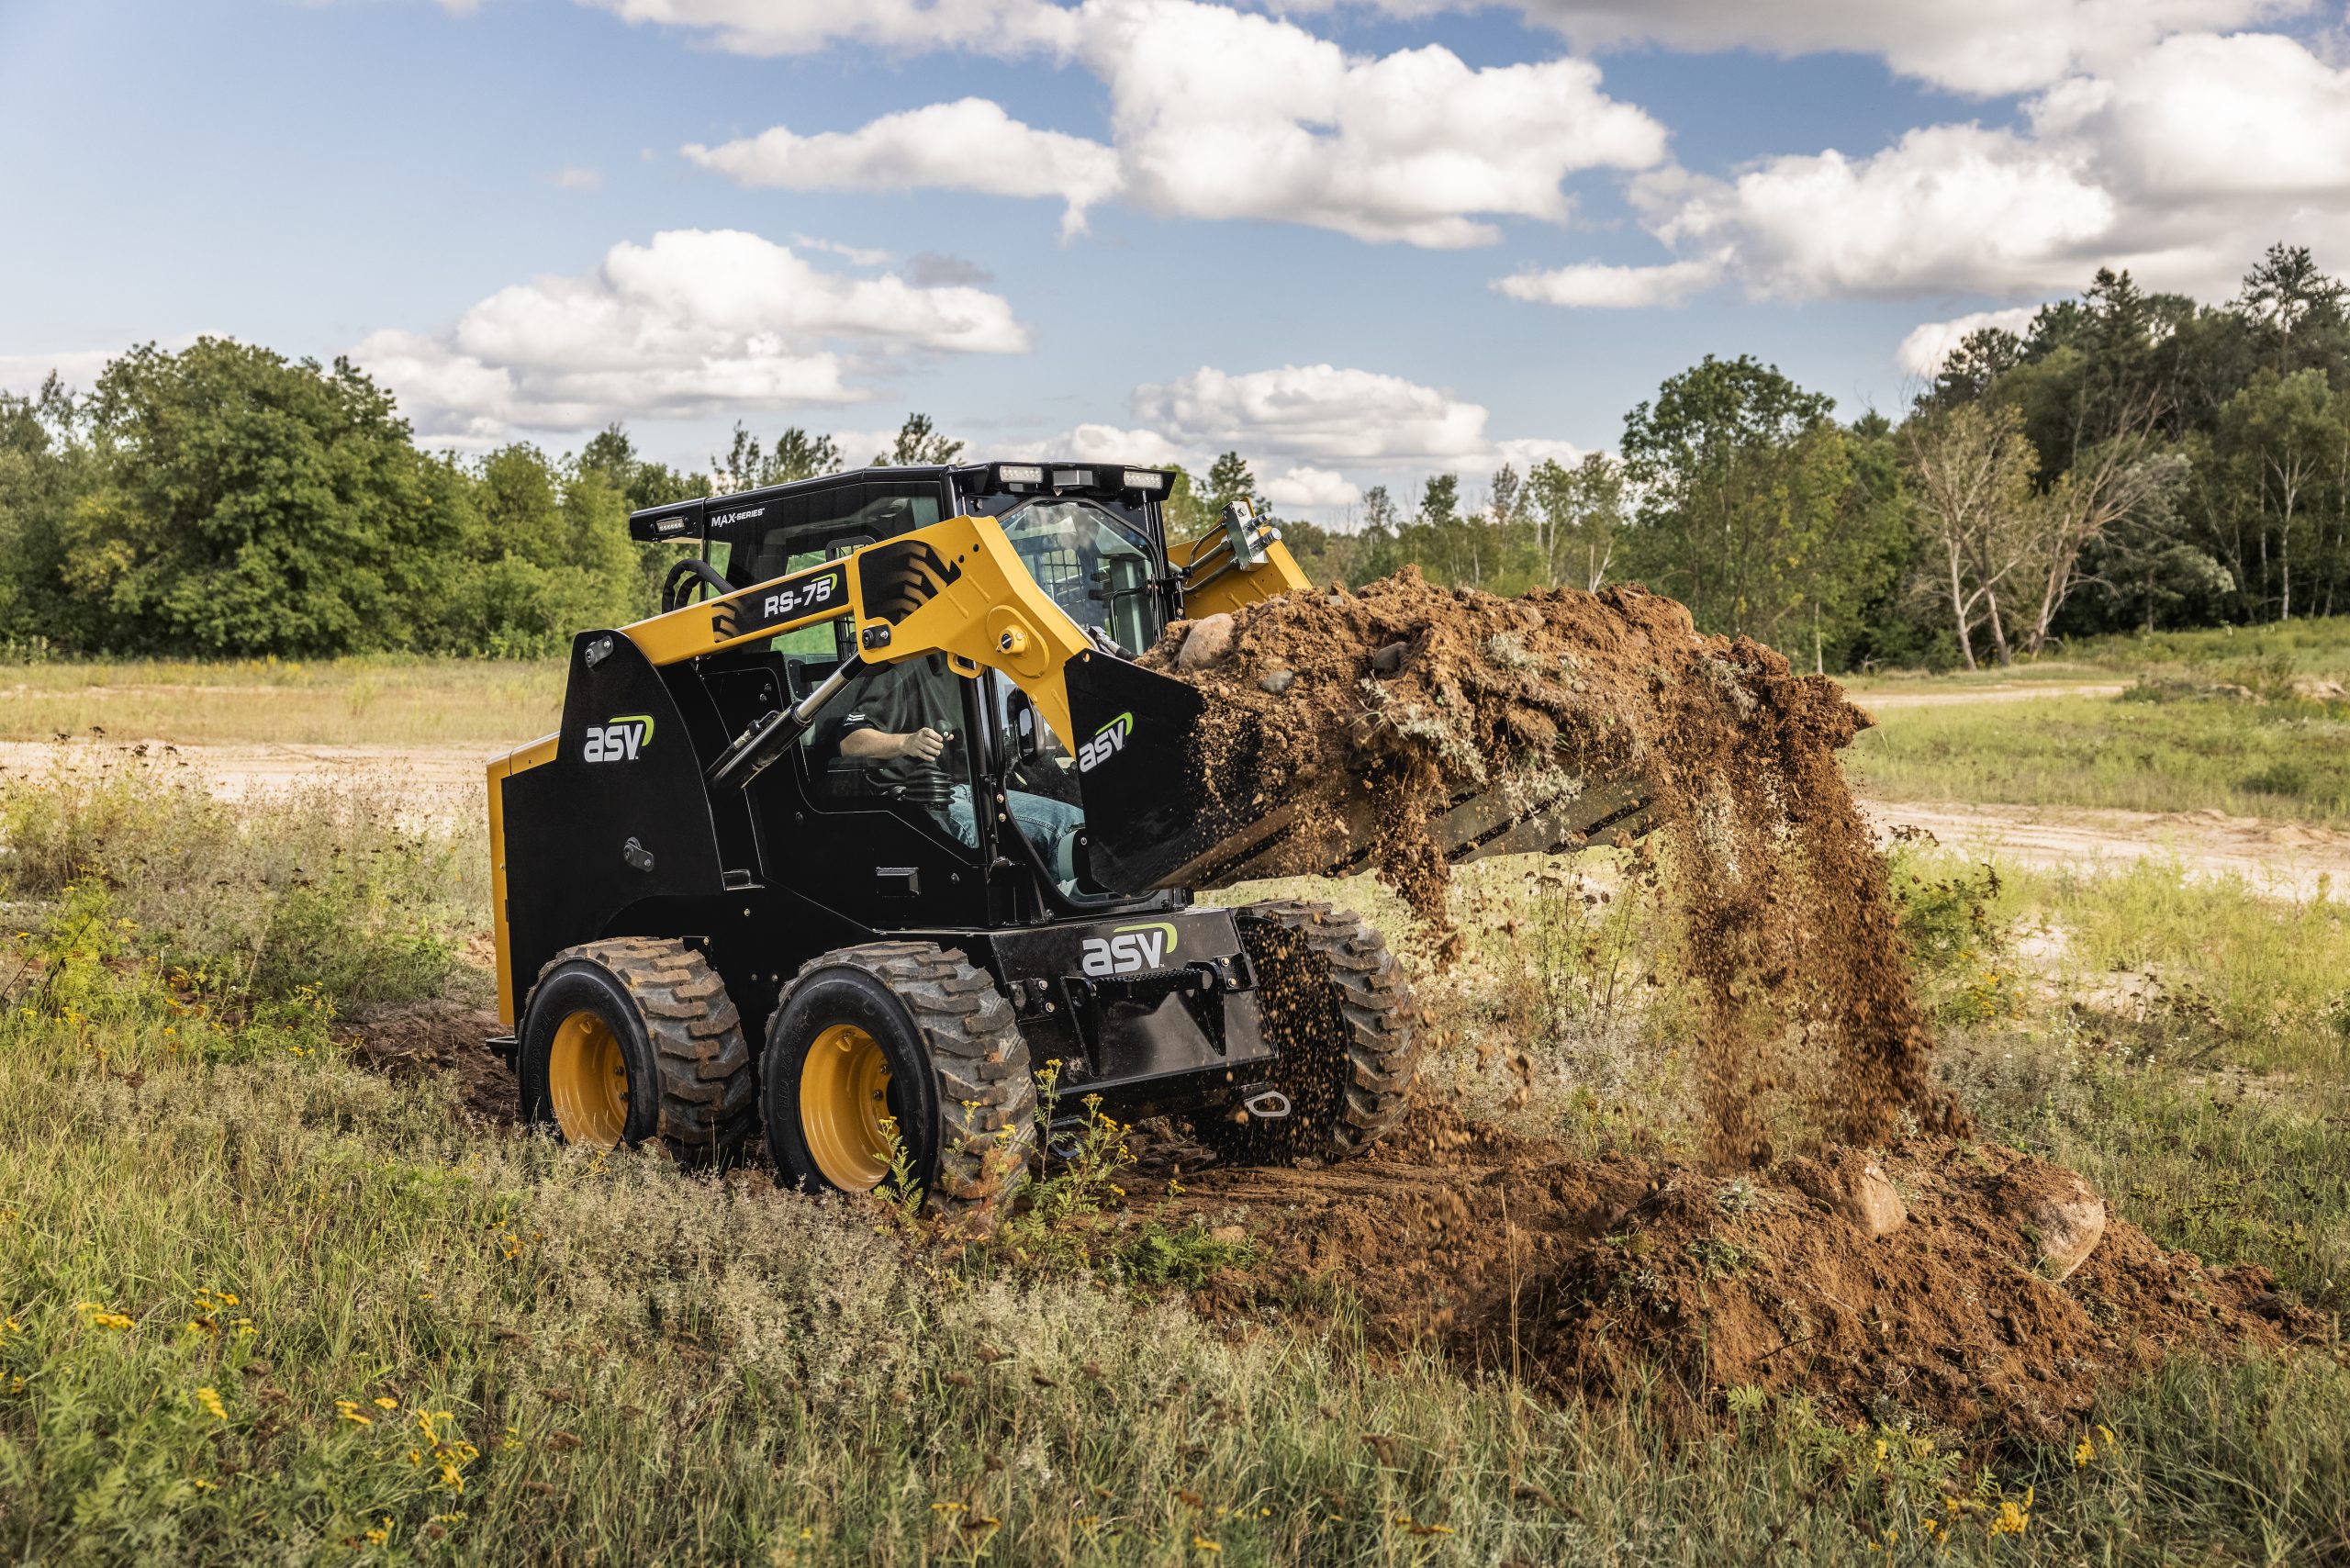 ASV_RS75 (skid steer article March 2022)